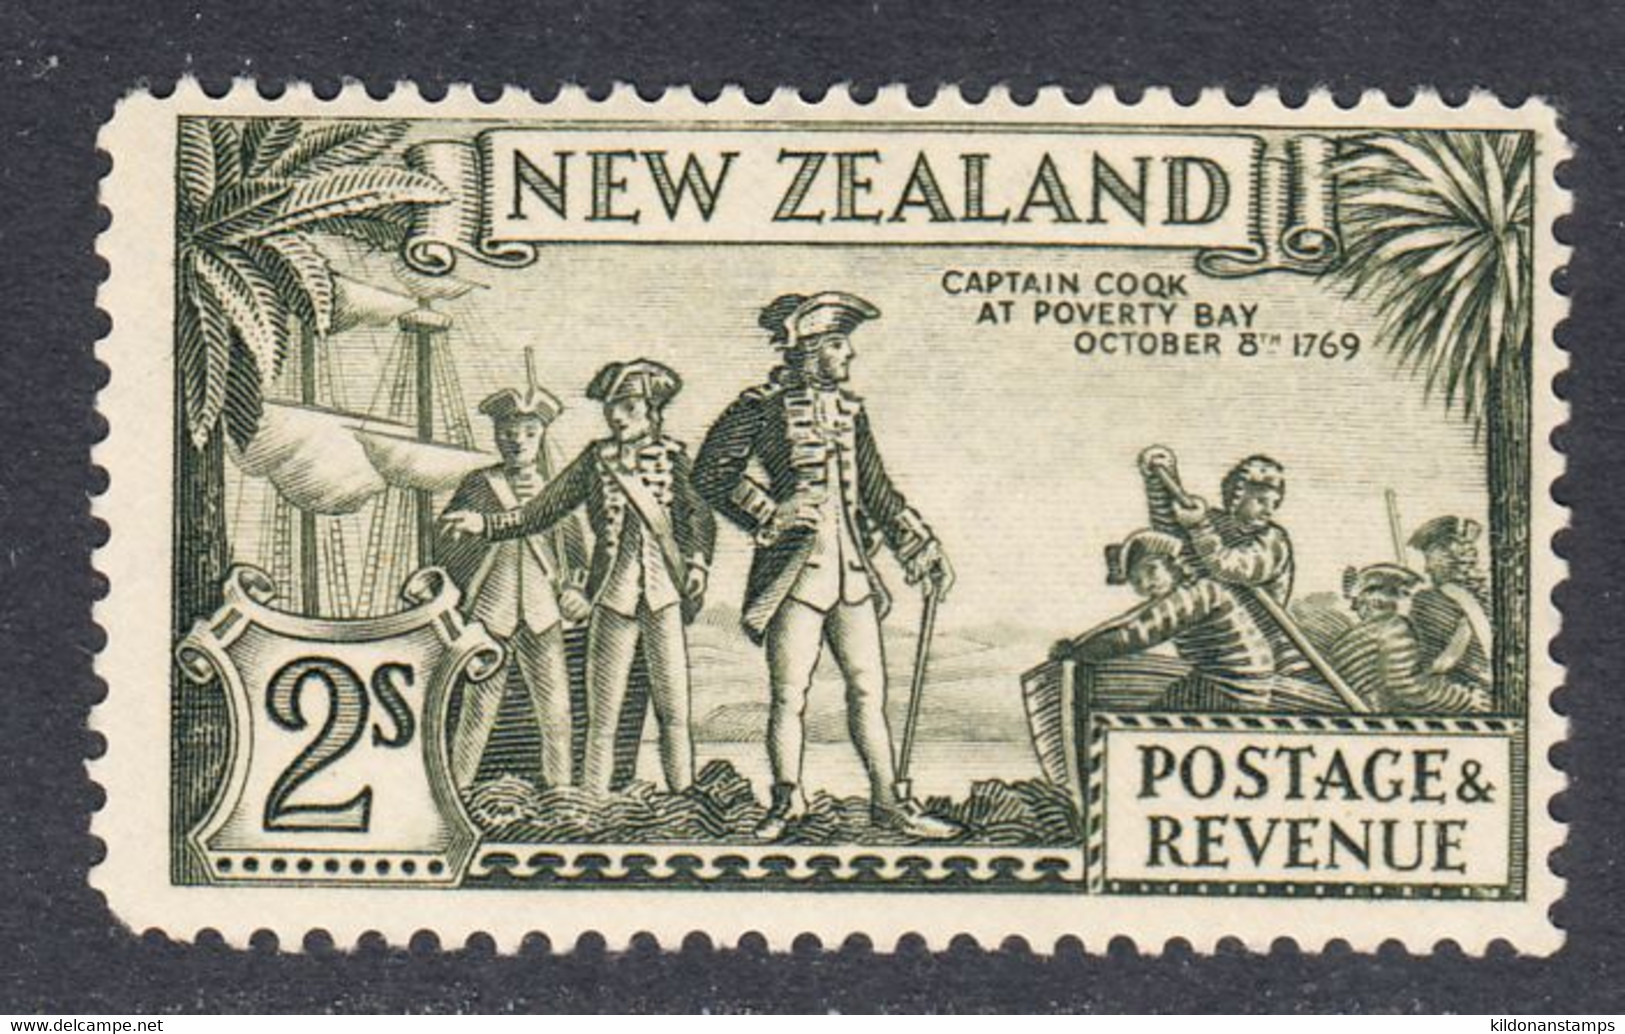 New Zealand 1936-42 Mint No Hinge, 'COQK' Variant, Perf 13-14x13.5, Sc# ,SG 589a - Unused Stamps